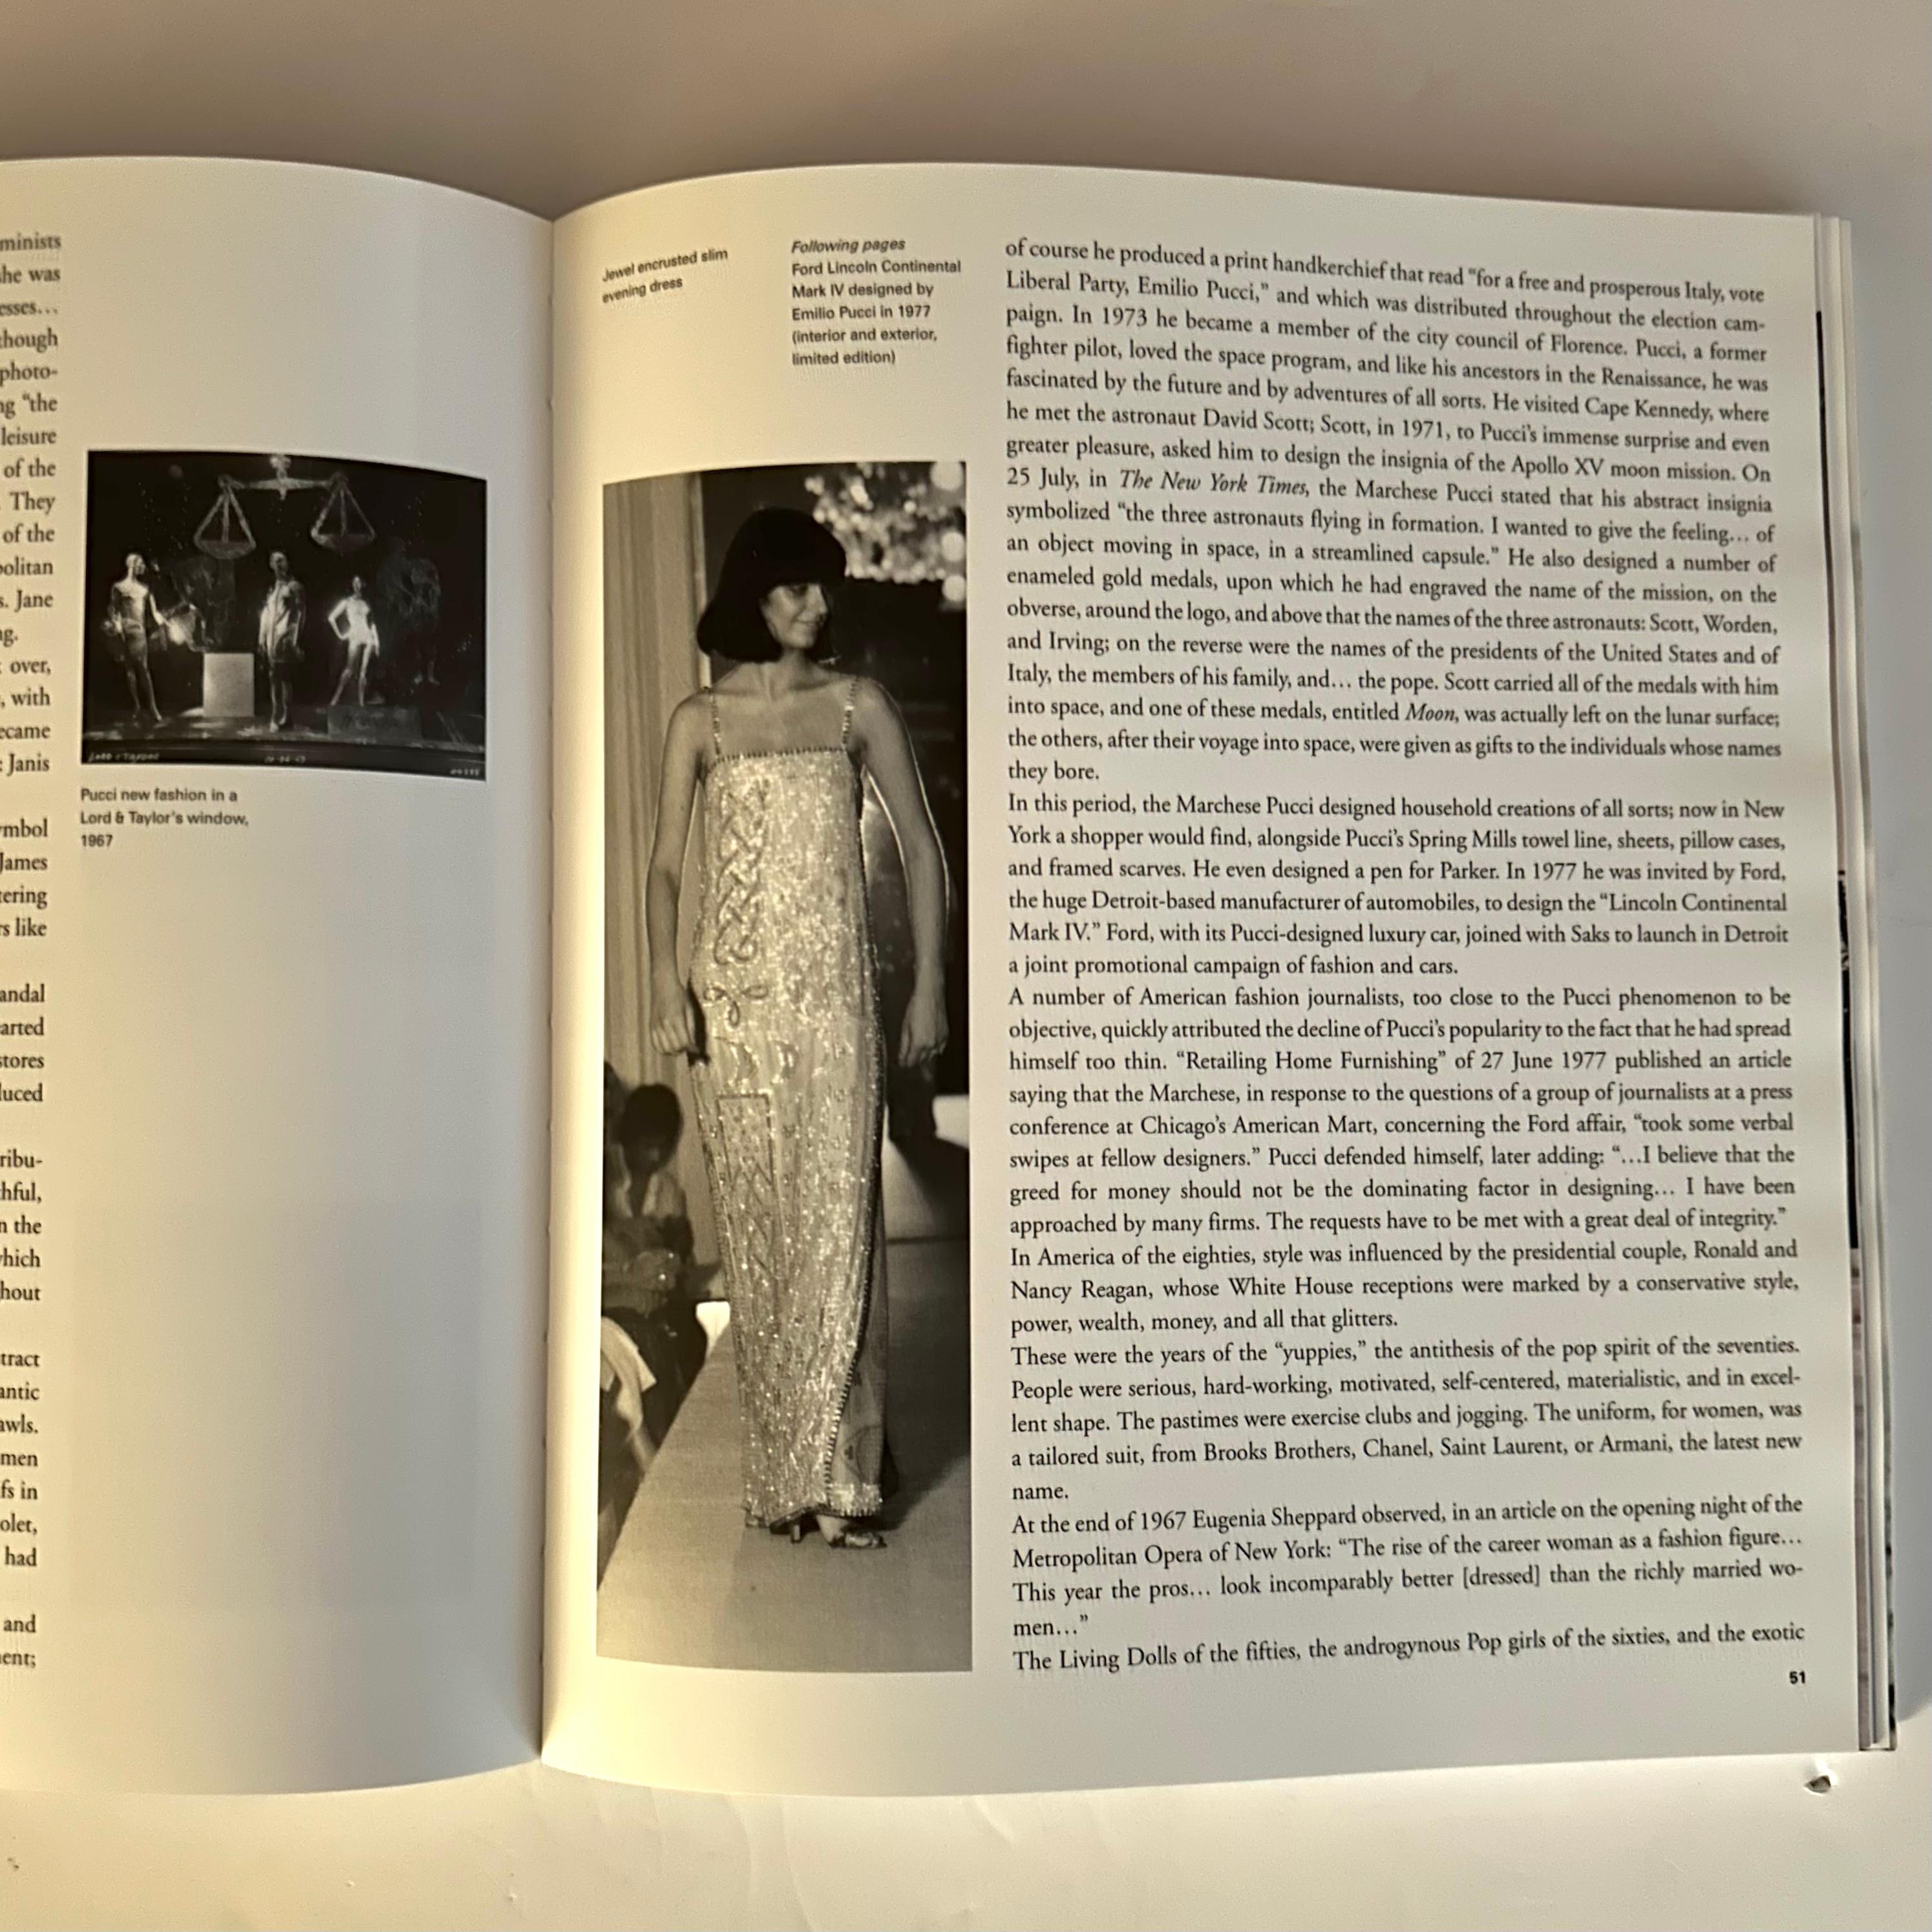 Emilio Pucci: Biennale di Firenze, Looking at Fashion - 1st edition, 1996 For Sale 1